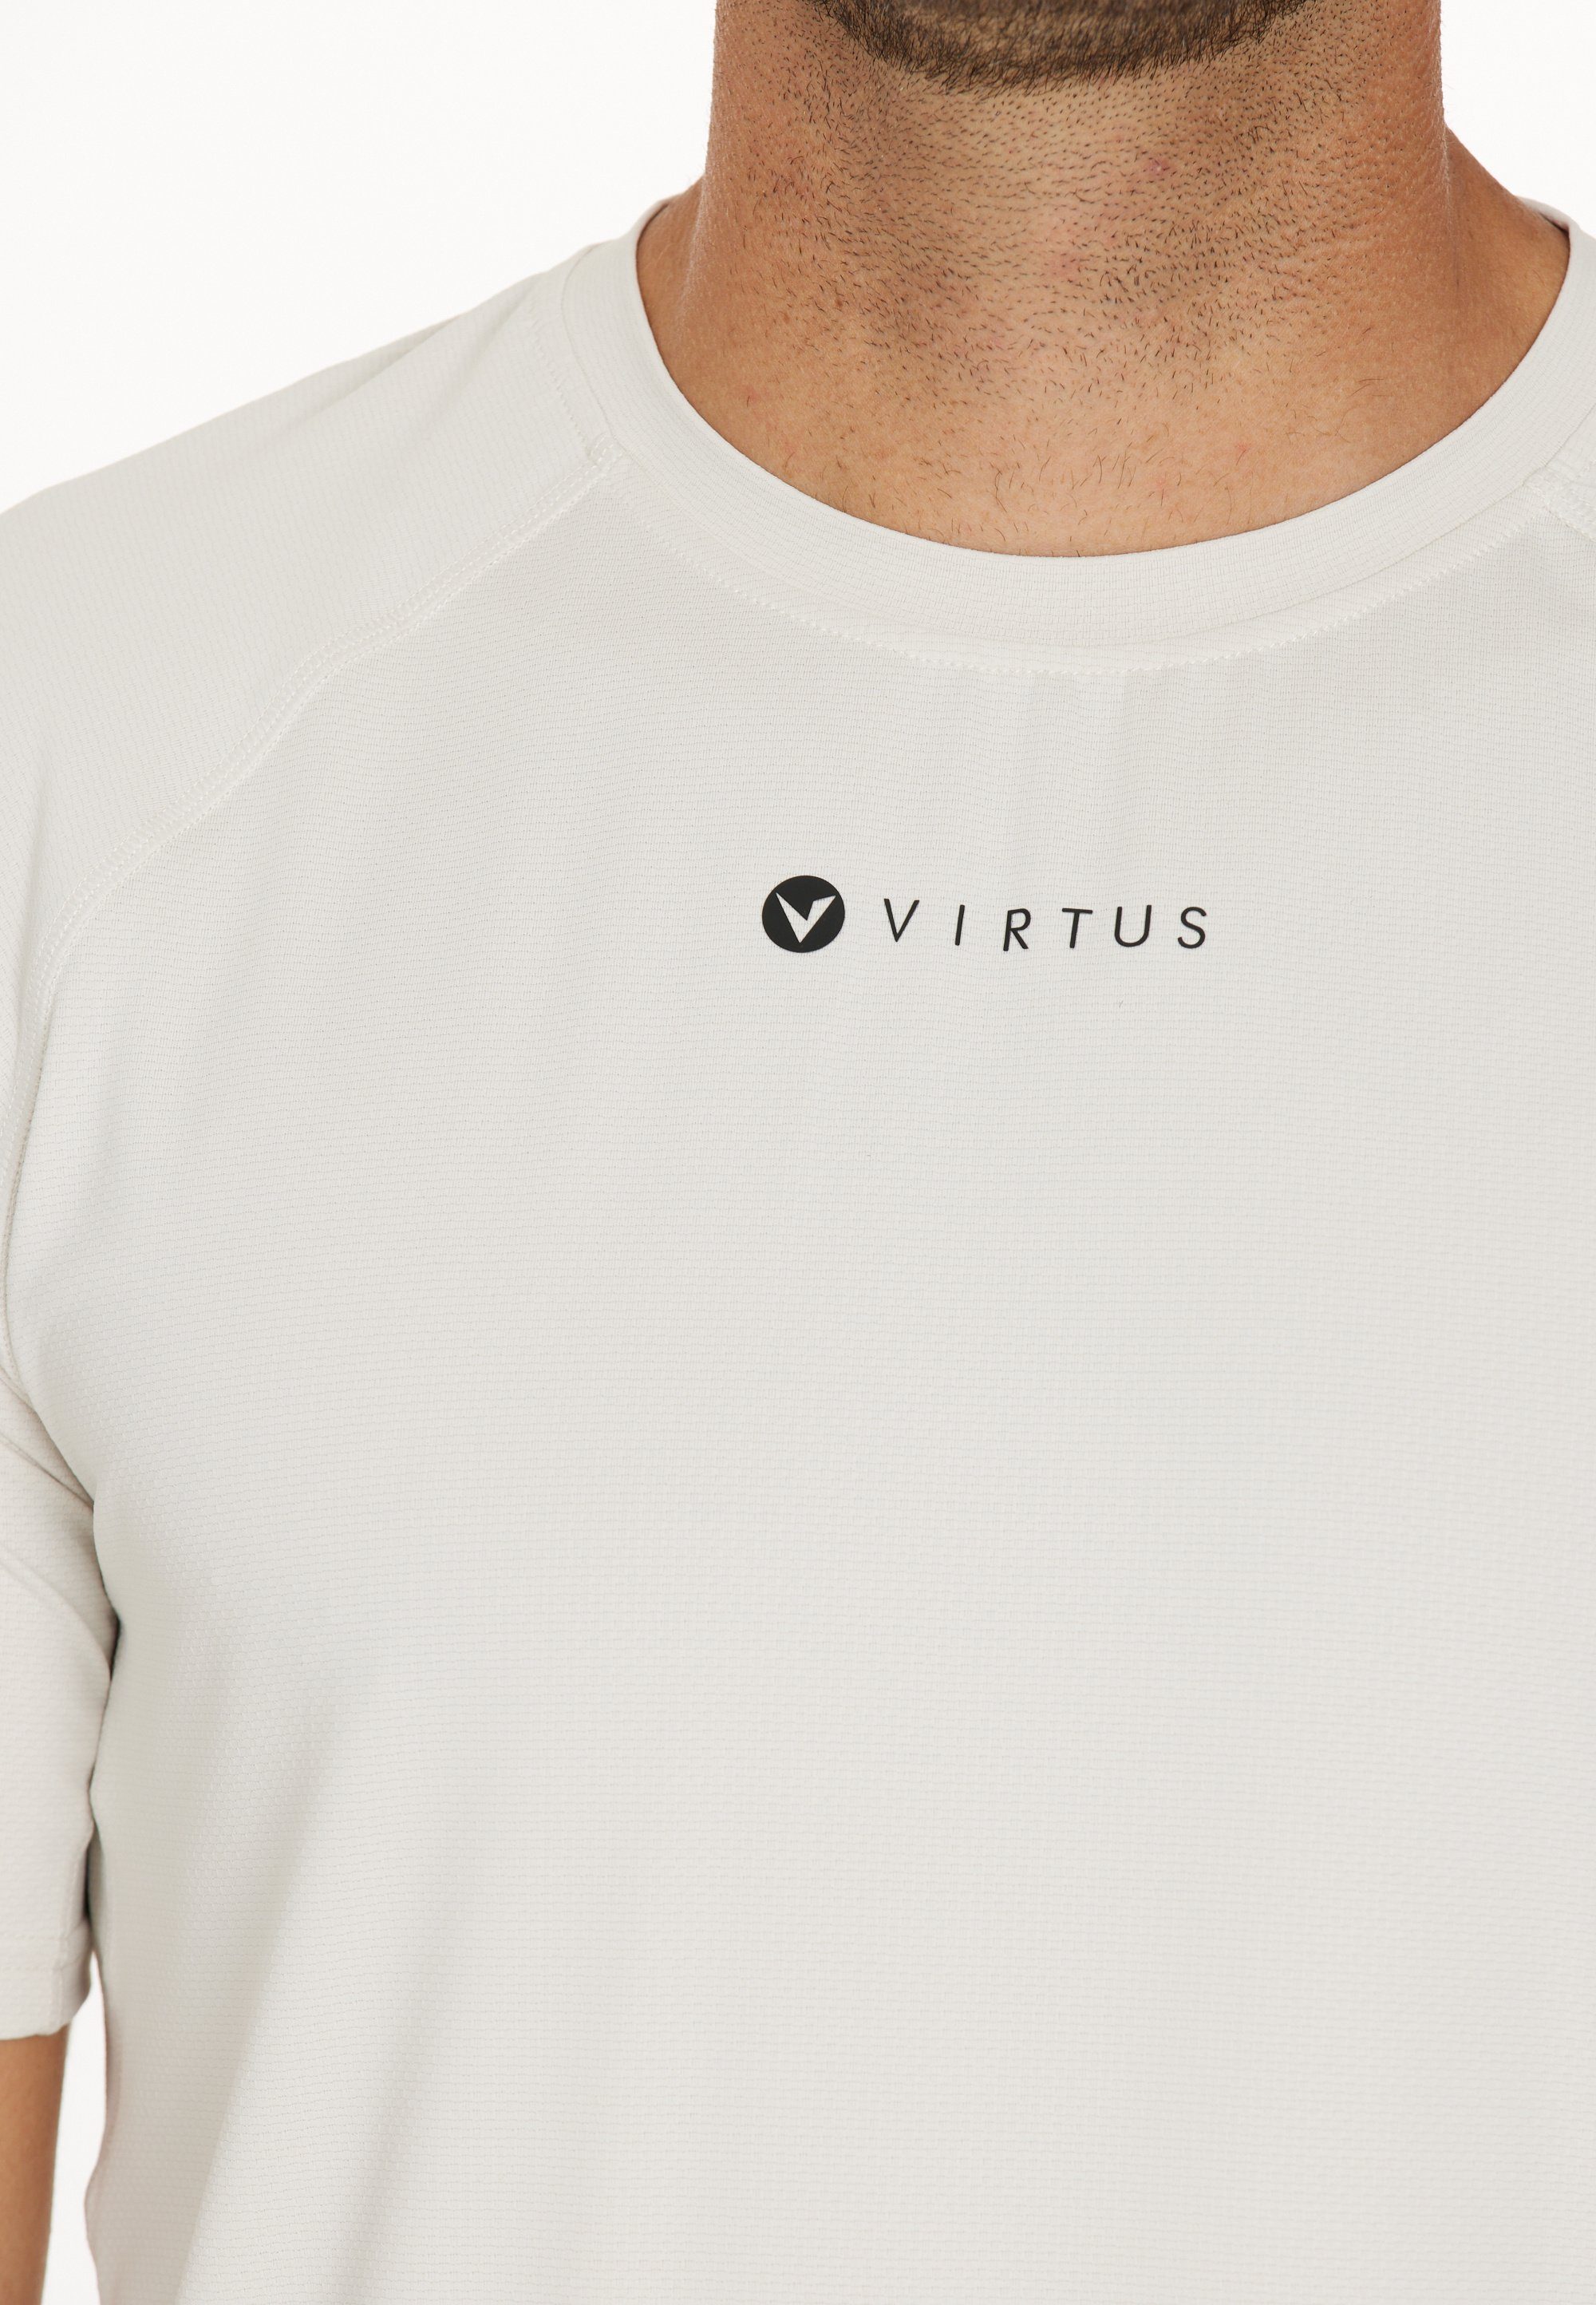 Virtus Muskelshirt Toscan (1-tlg) mit Silver+-Technologie offwhite